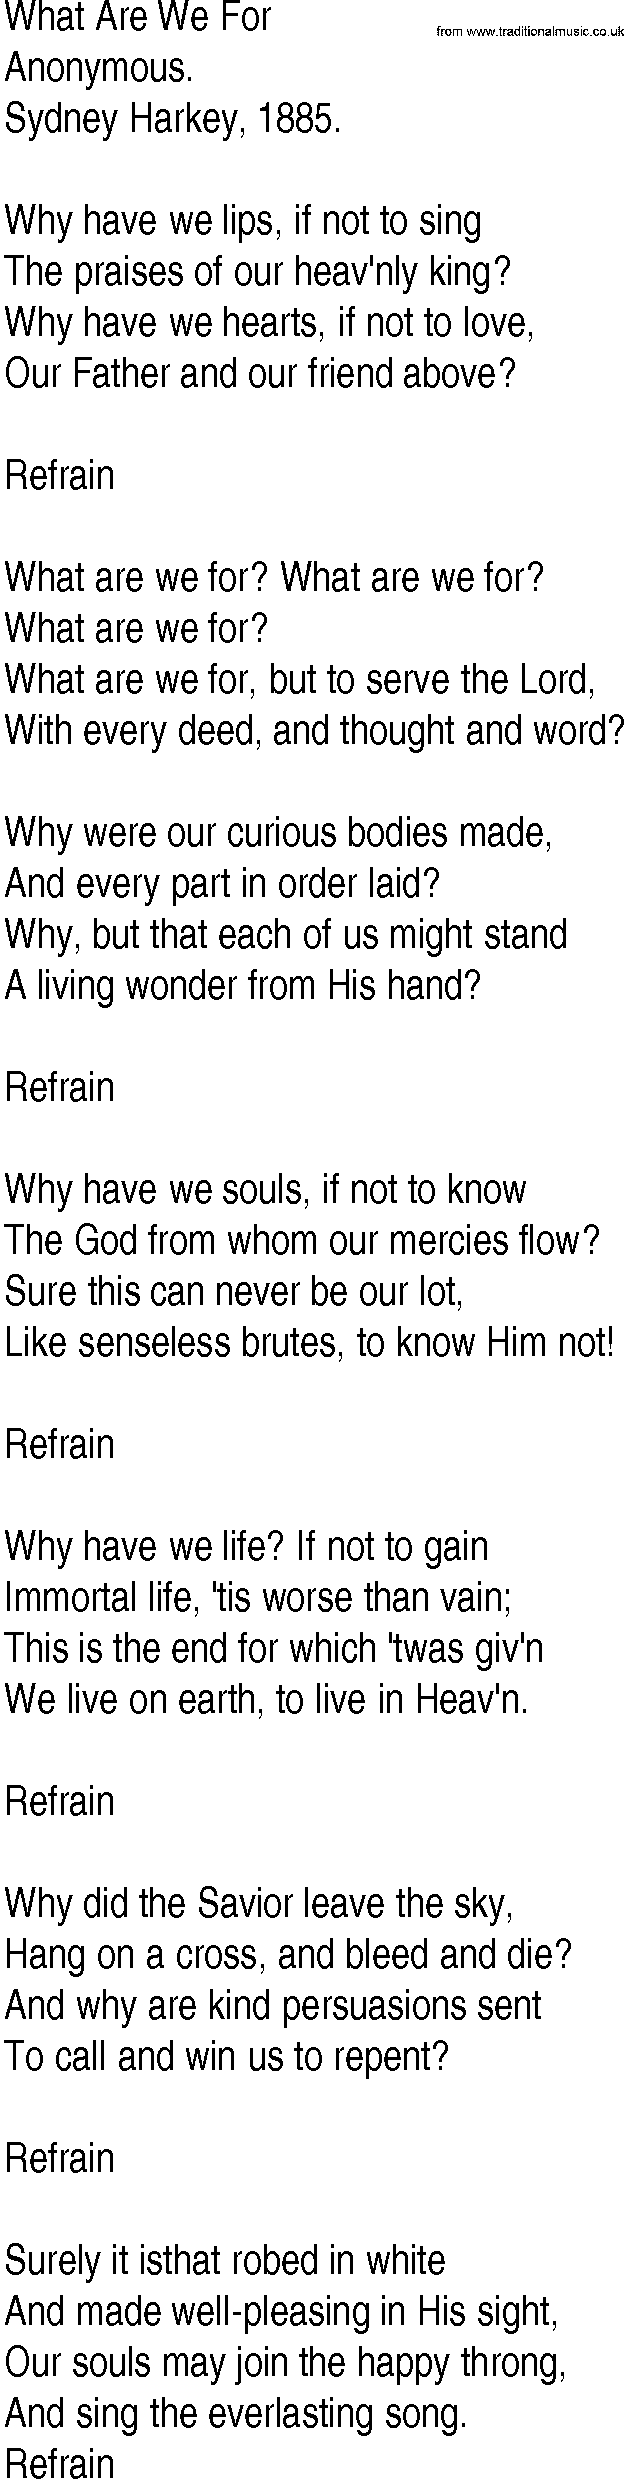 Hymn and Gospel Song: What Are We For by Anonymous lyrics